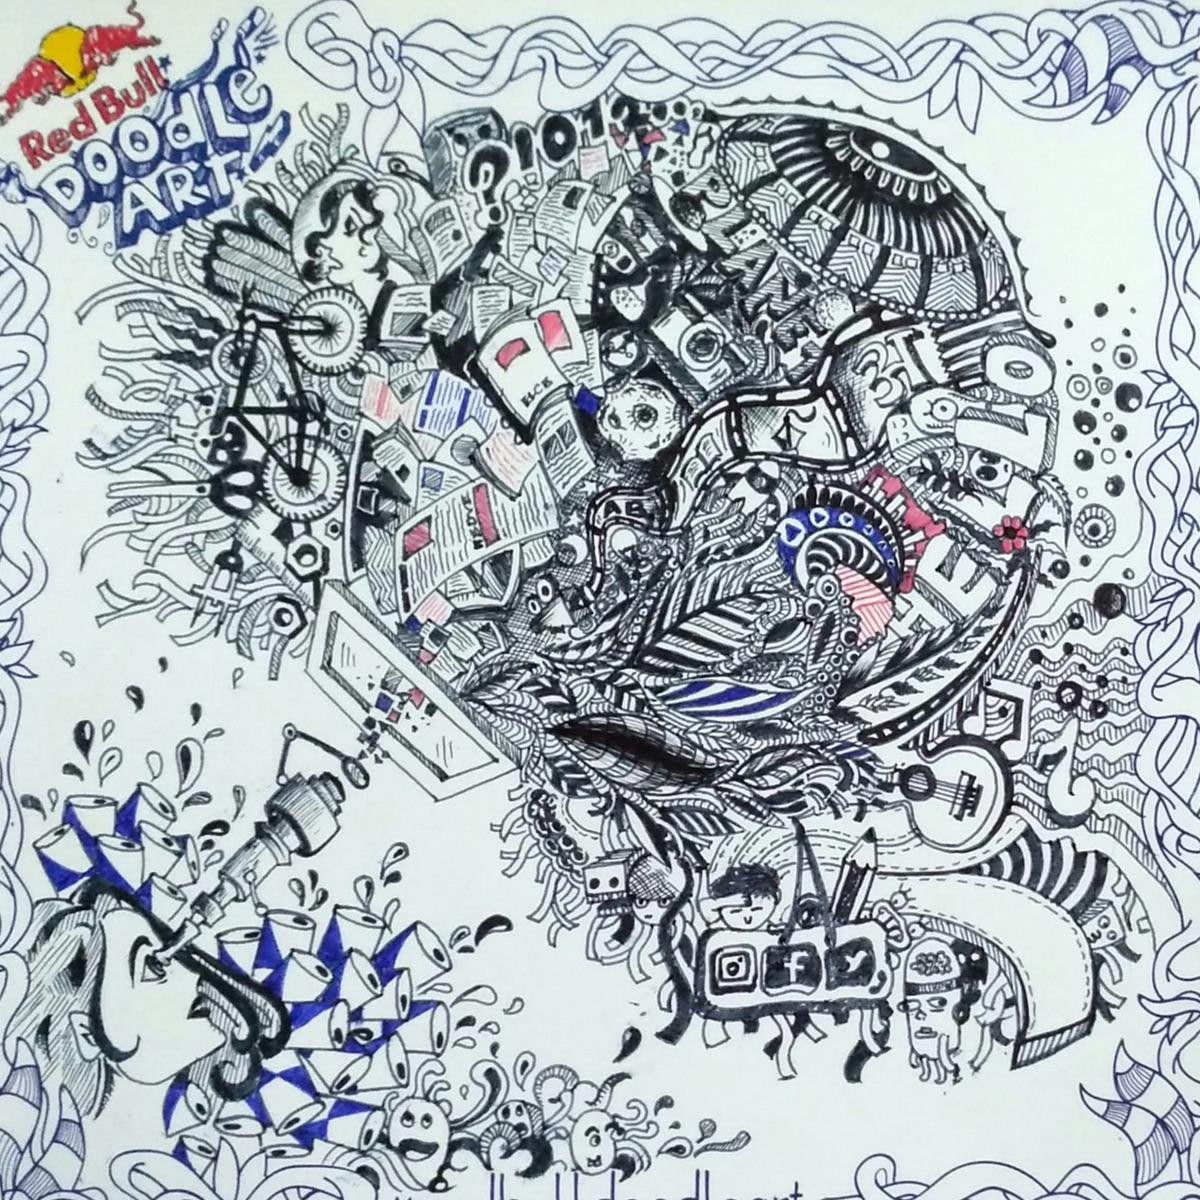 Inspiring doodles from Red Bull Doodle Art India 2017